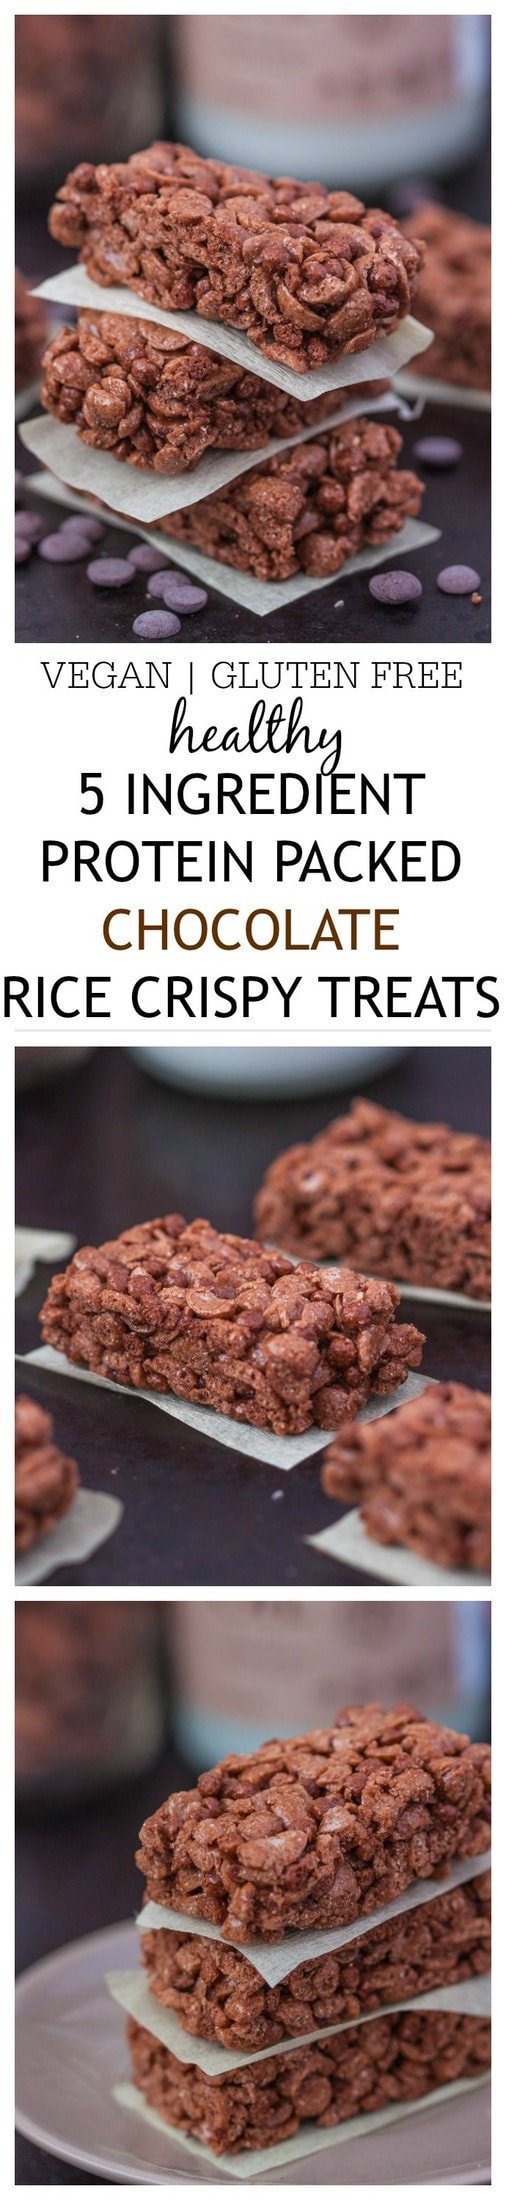 5 Ingredient {No bake} Protein Chocolate Rice Crispy Treats - A high protein, low sugar and portable snack- Perfect fuel in between meals or as a pre or post workout boost! Vegan, gluten free and refined sugar free and just FIVE ingredients! @thebigmansworld - thebigmansworld.com